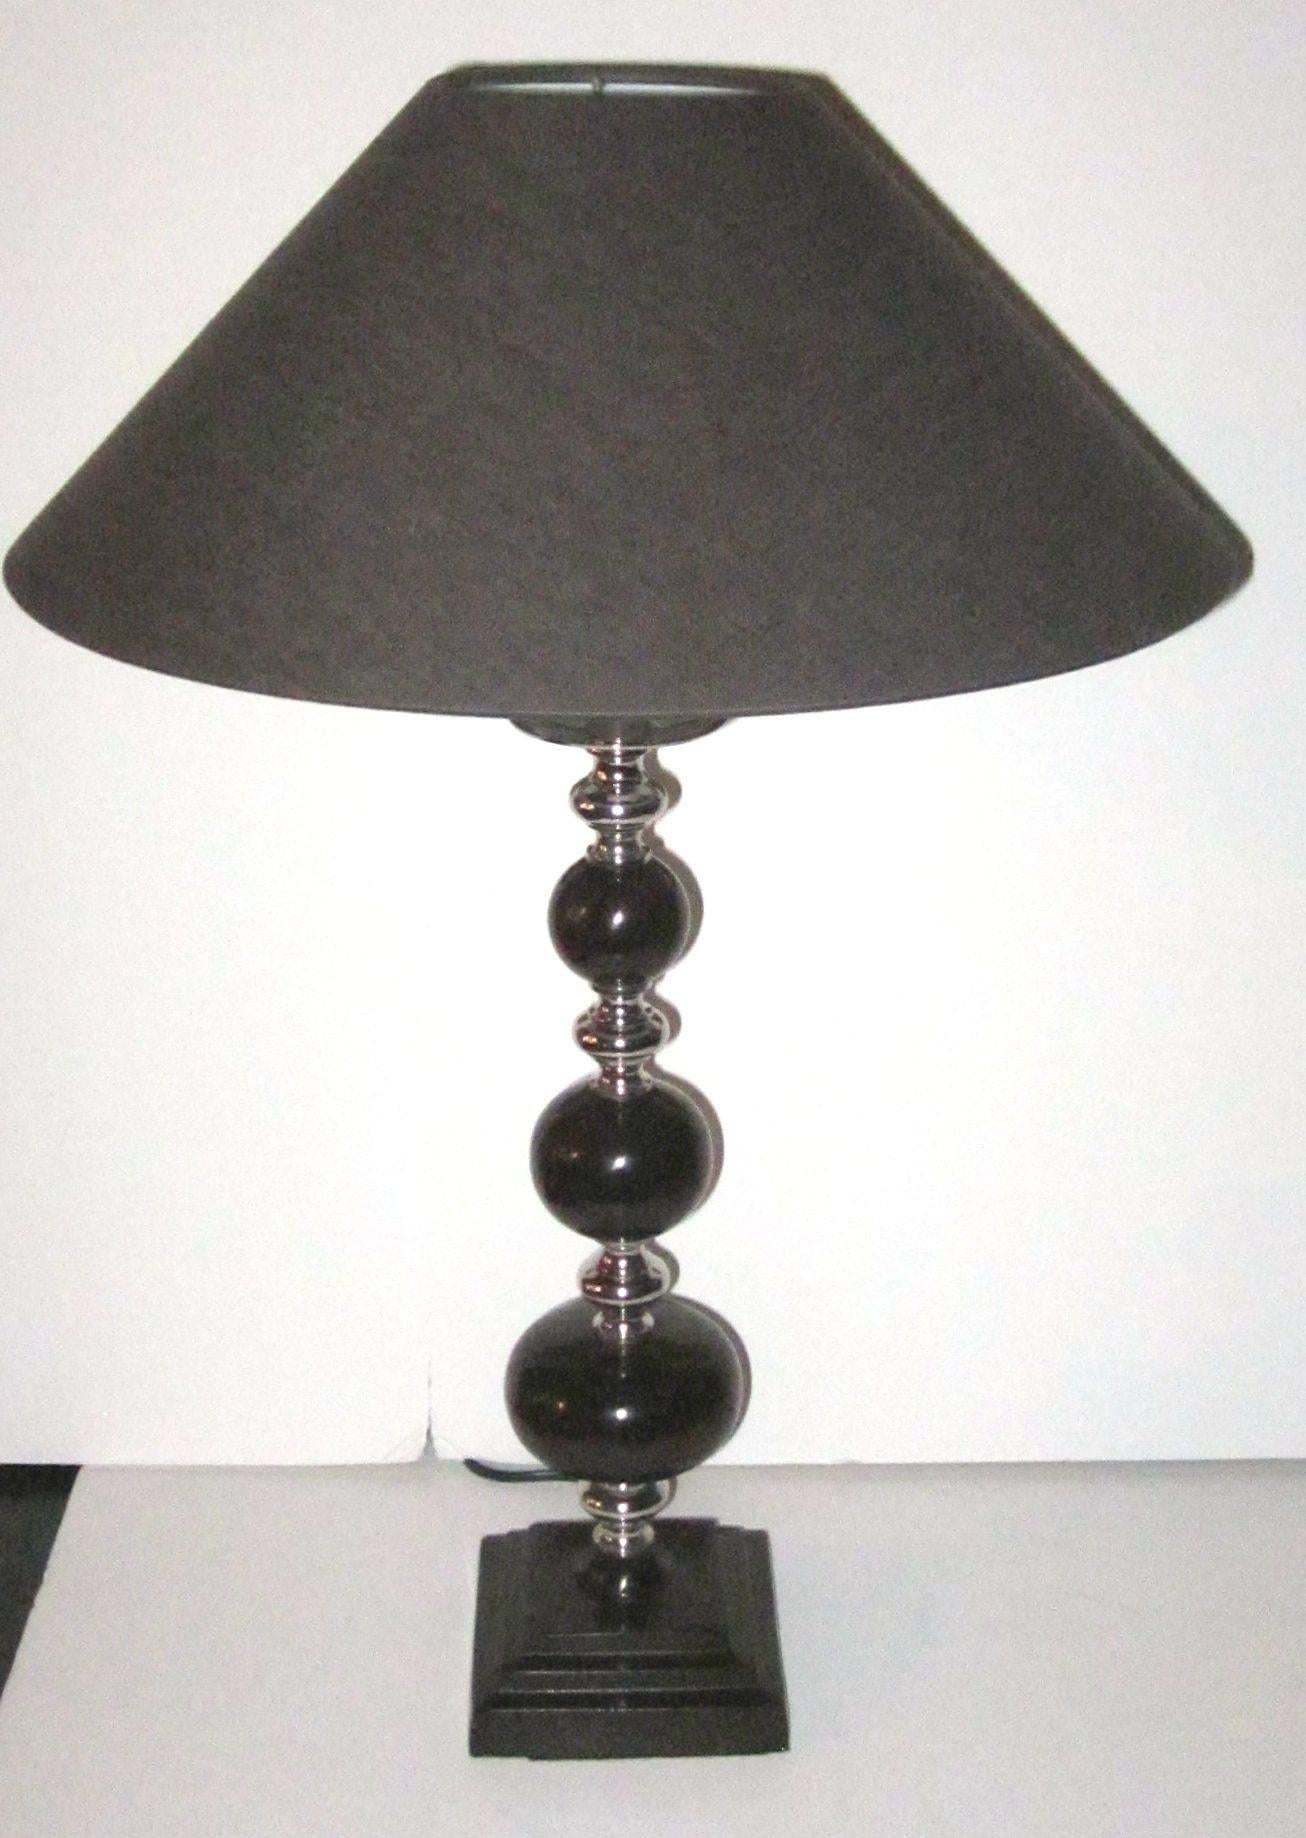 Contemporary pair of dark brown ball with chrome trim table lamps.
European sockets.
Shades not included.
Maximum wattage is 60 watts per lamp.